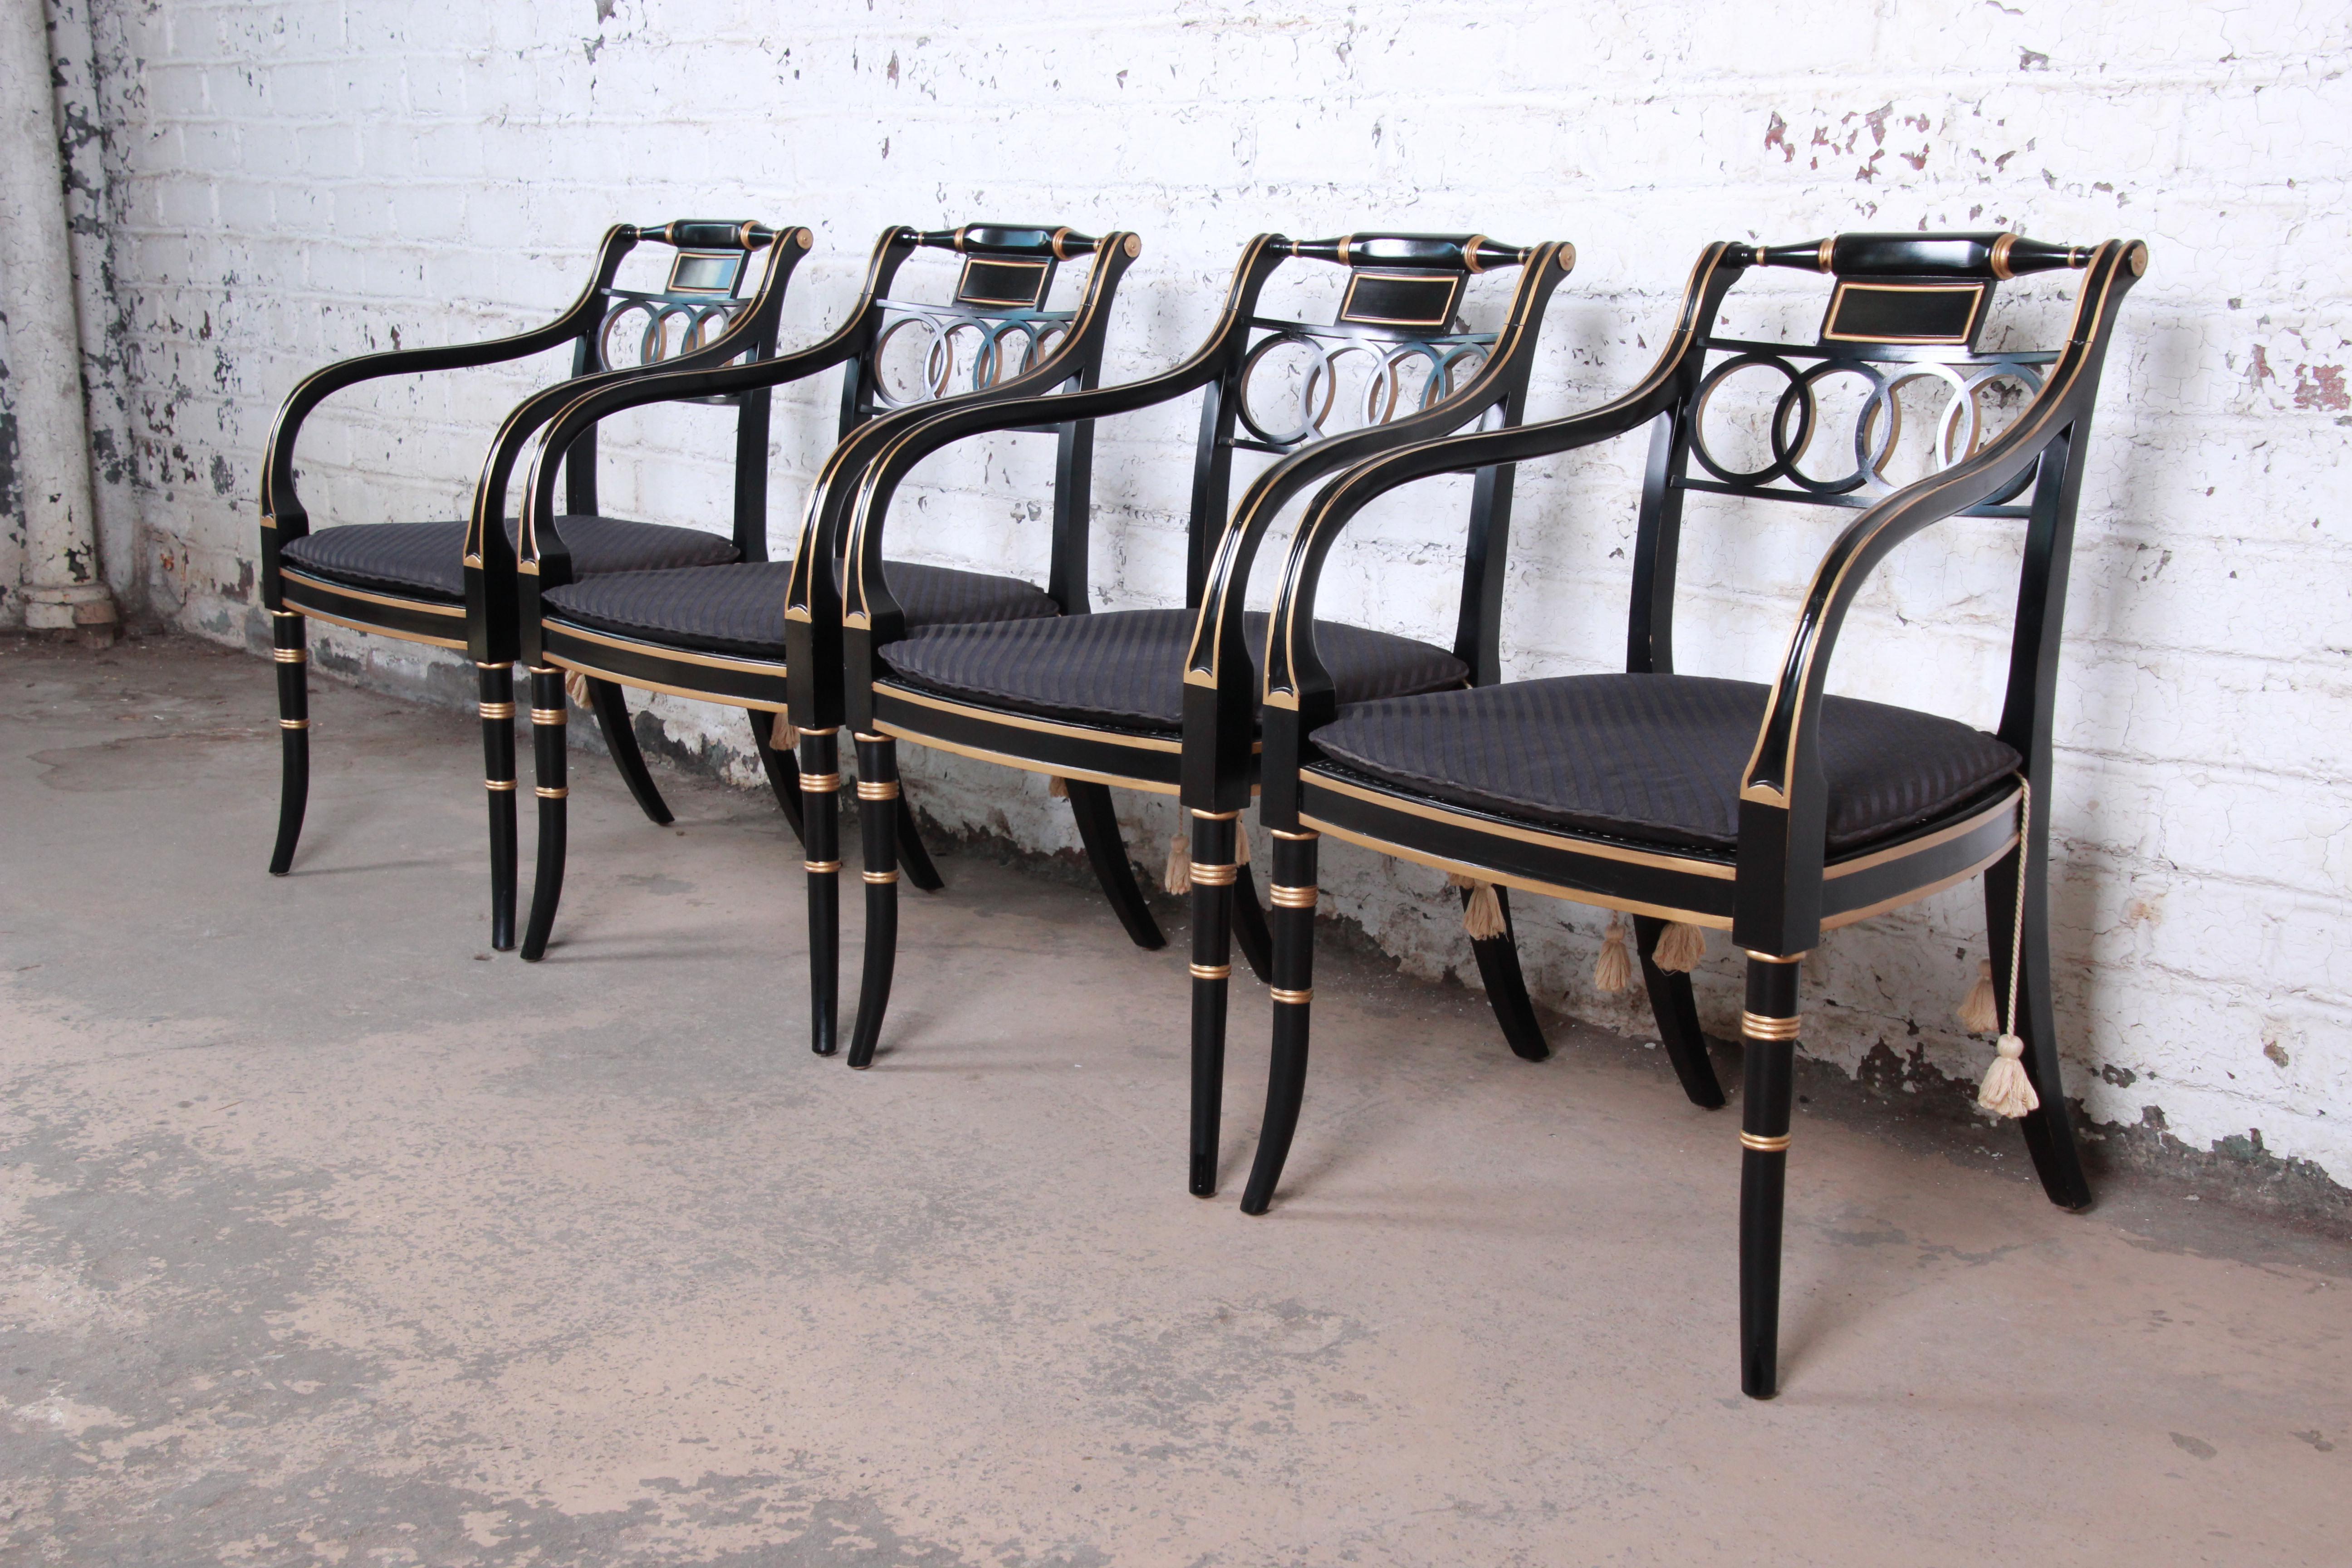 An exceptional set of four Regency style armchairs from the Historic Charleston collection by Baker Furniture. The chairs feature stunning ebonized and gold gilt solid wood frames with caned seats and removable seat cushions. Made with the highest